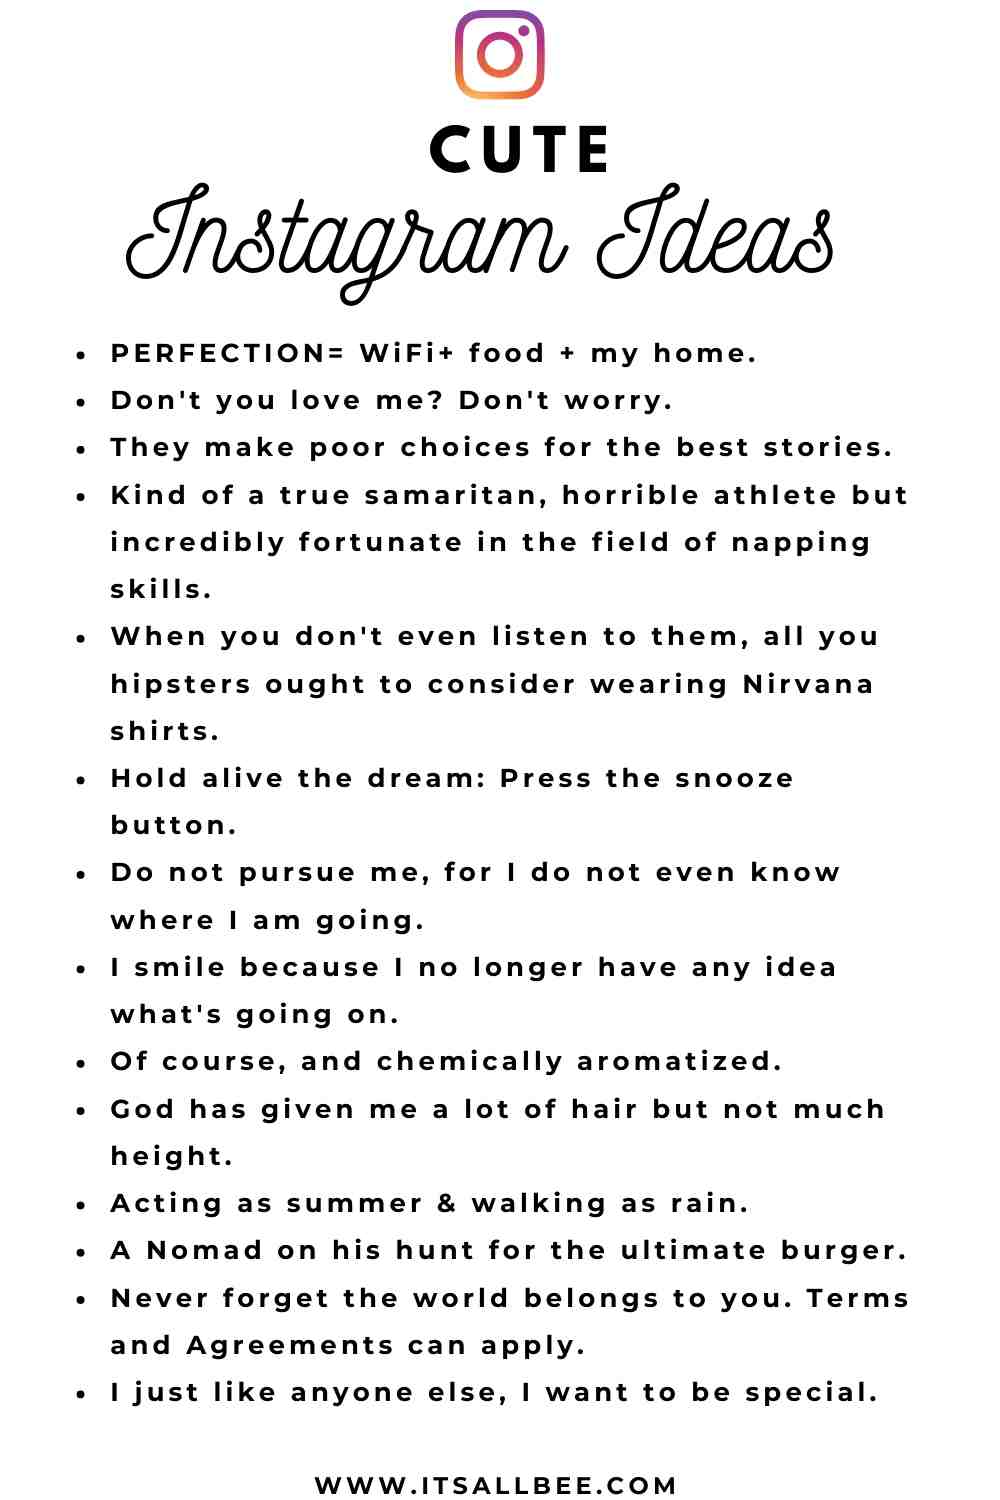 150 Quotes Captions Ideas For Instagram Bios For Guys